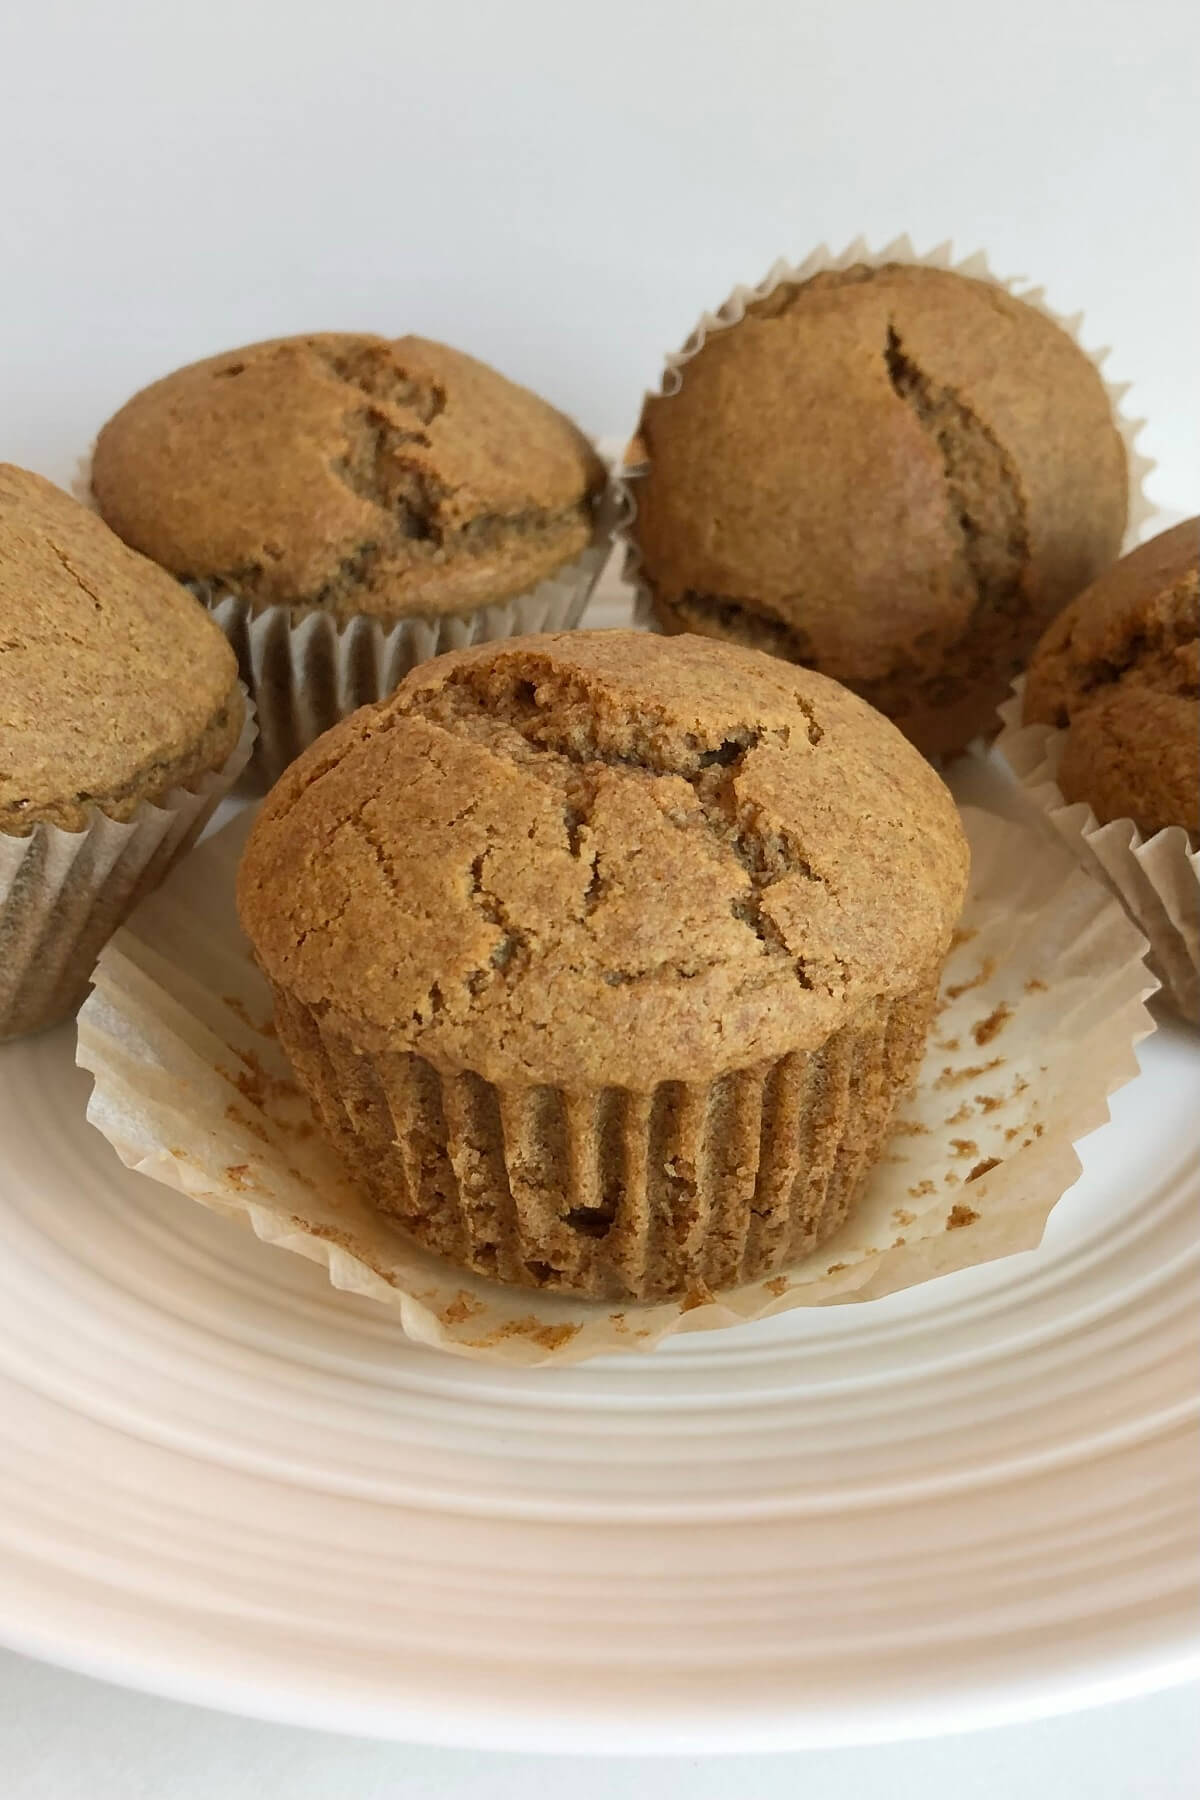 Muffins made with spelt on a white plate.